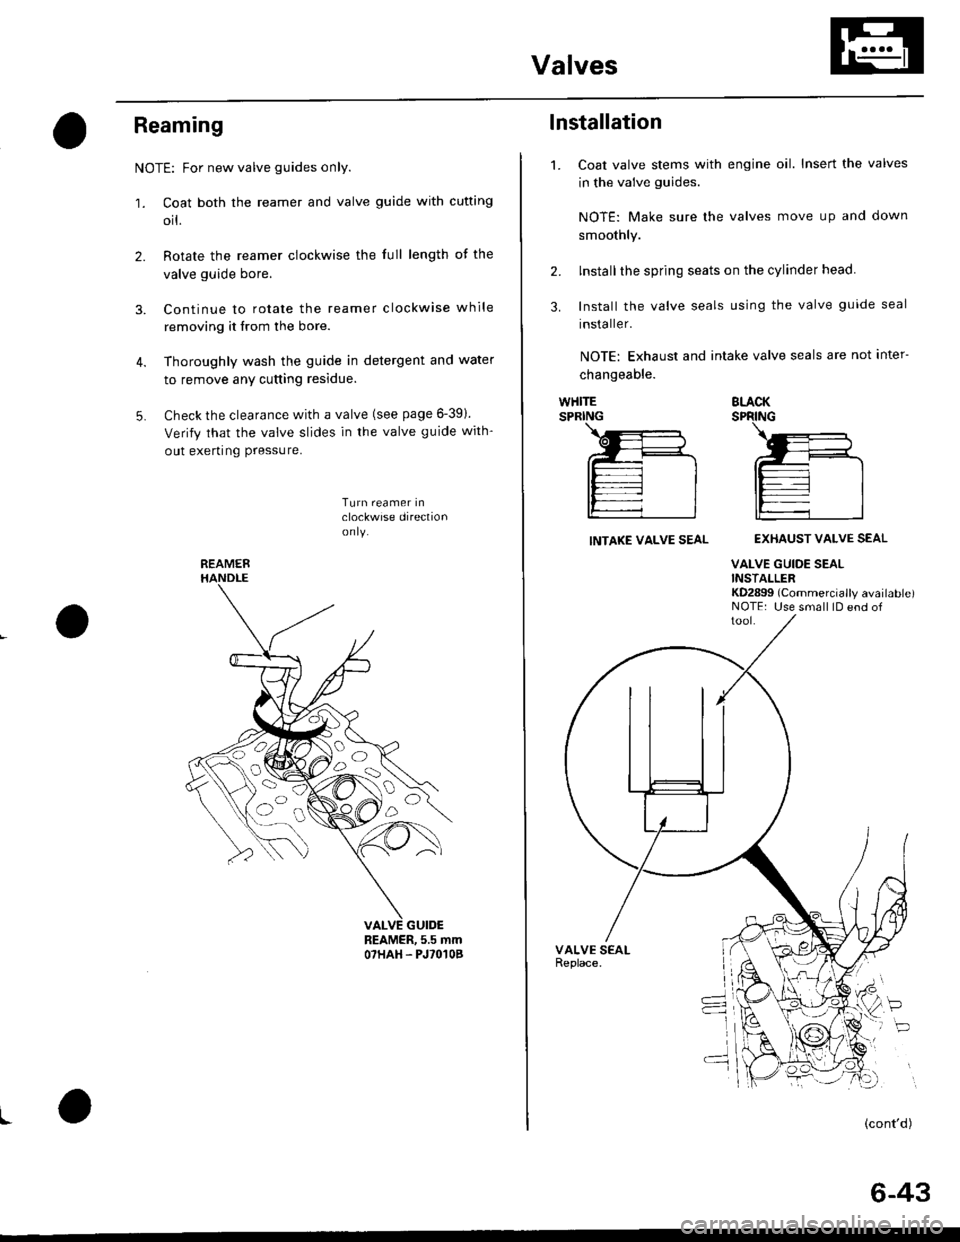 HONDA CIVIC 1998 6.G Service Manual Valves
Reaming
NOTE: For new valve guides only.
1. Coat both the reamer and valve guide with cufting
orl.
2. Rotate the reamer clockwise the full length of the
valve guide bore.
3. Continue to rotate 